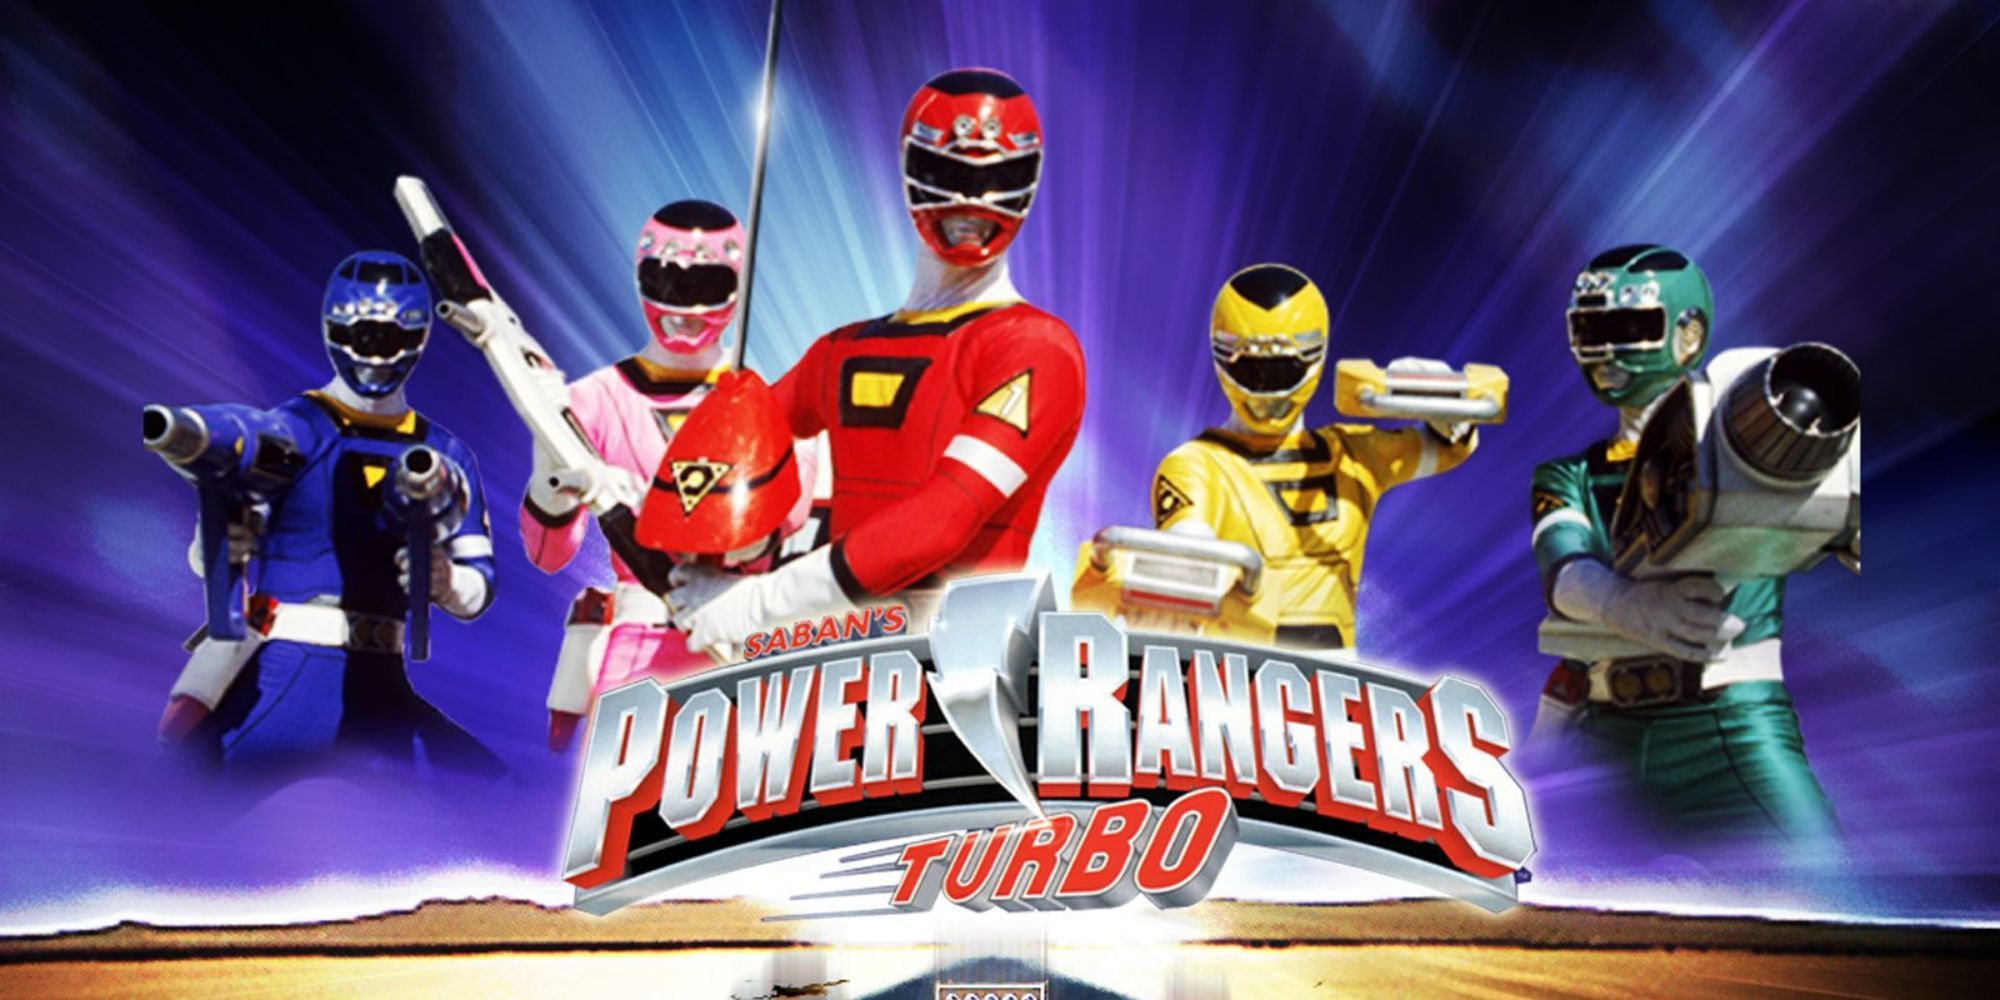 The Rangers posing around the title in Power Rangers Turbo